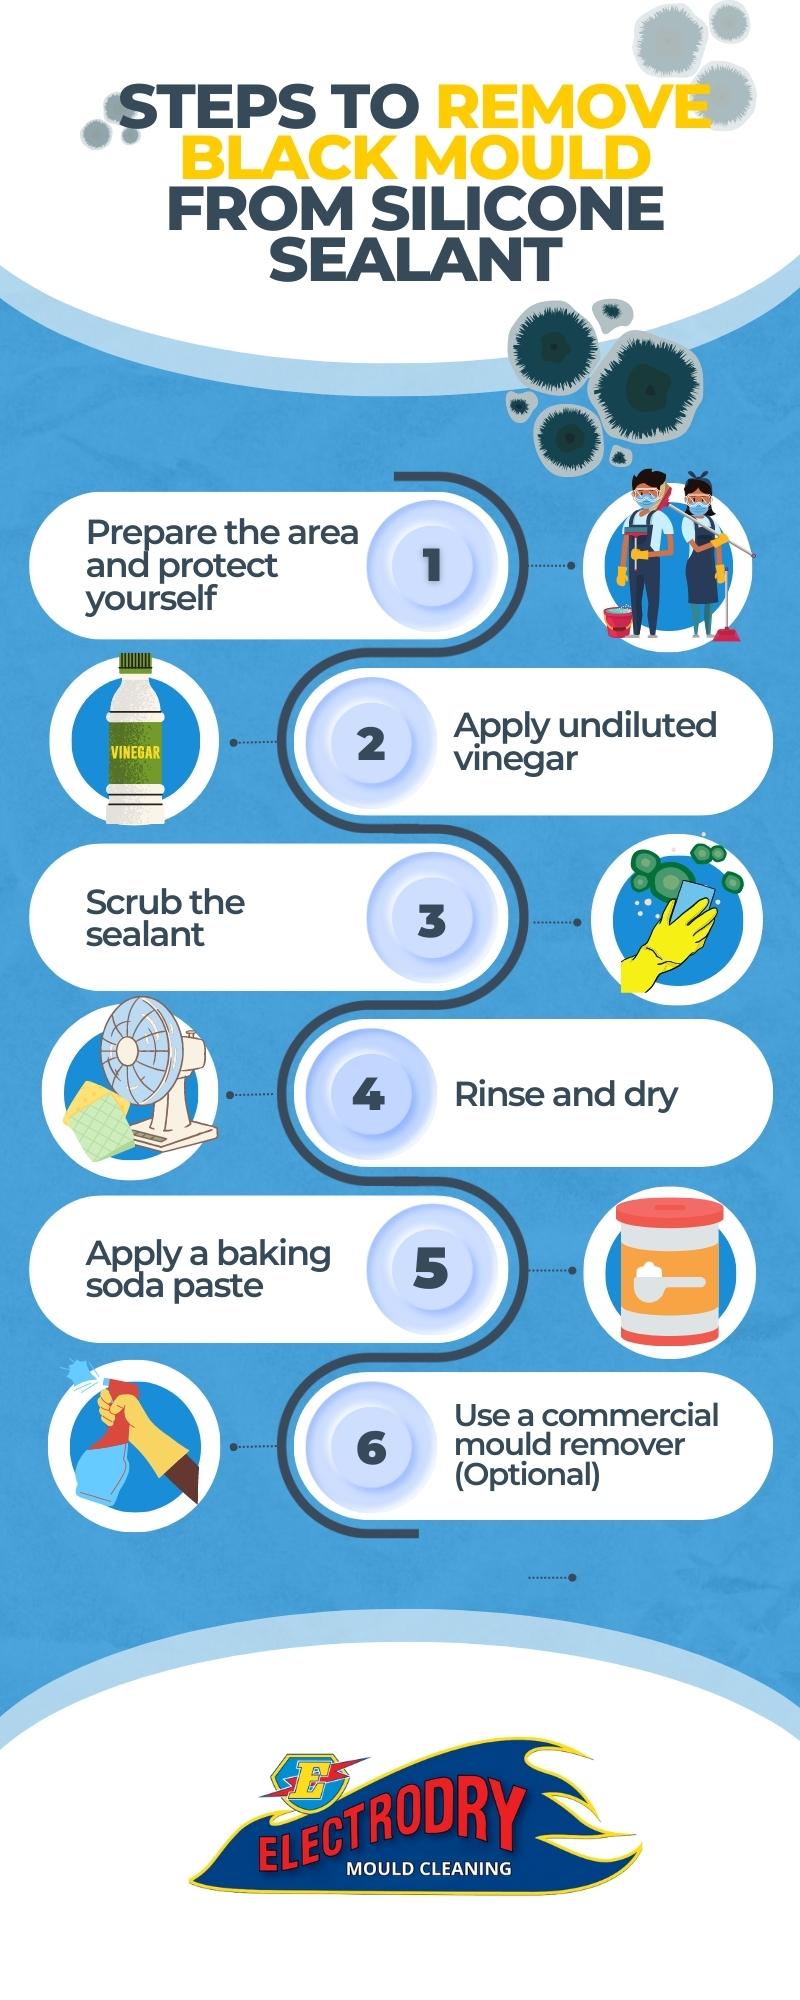 How to remove black mould from silicone sealant - infographic